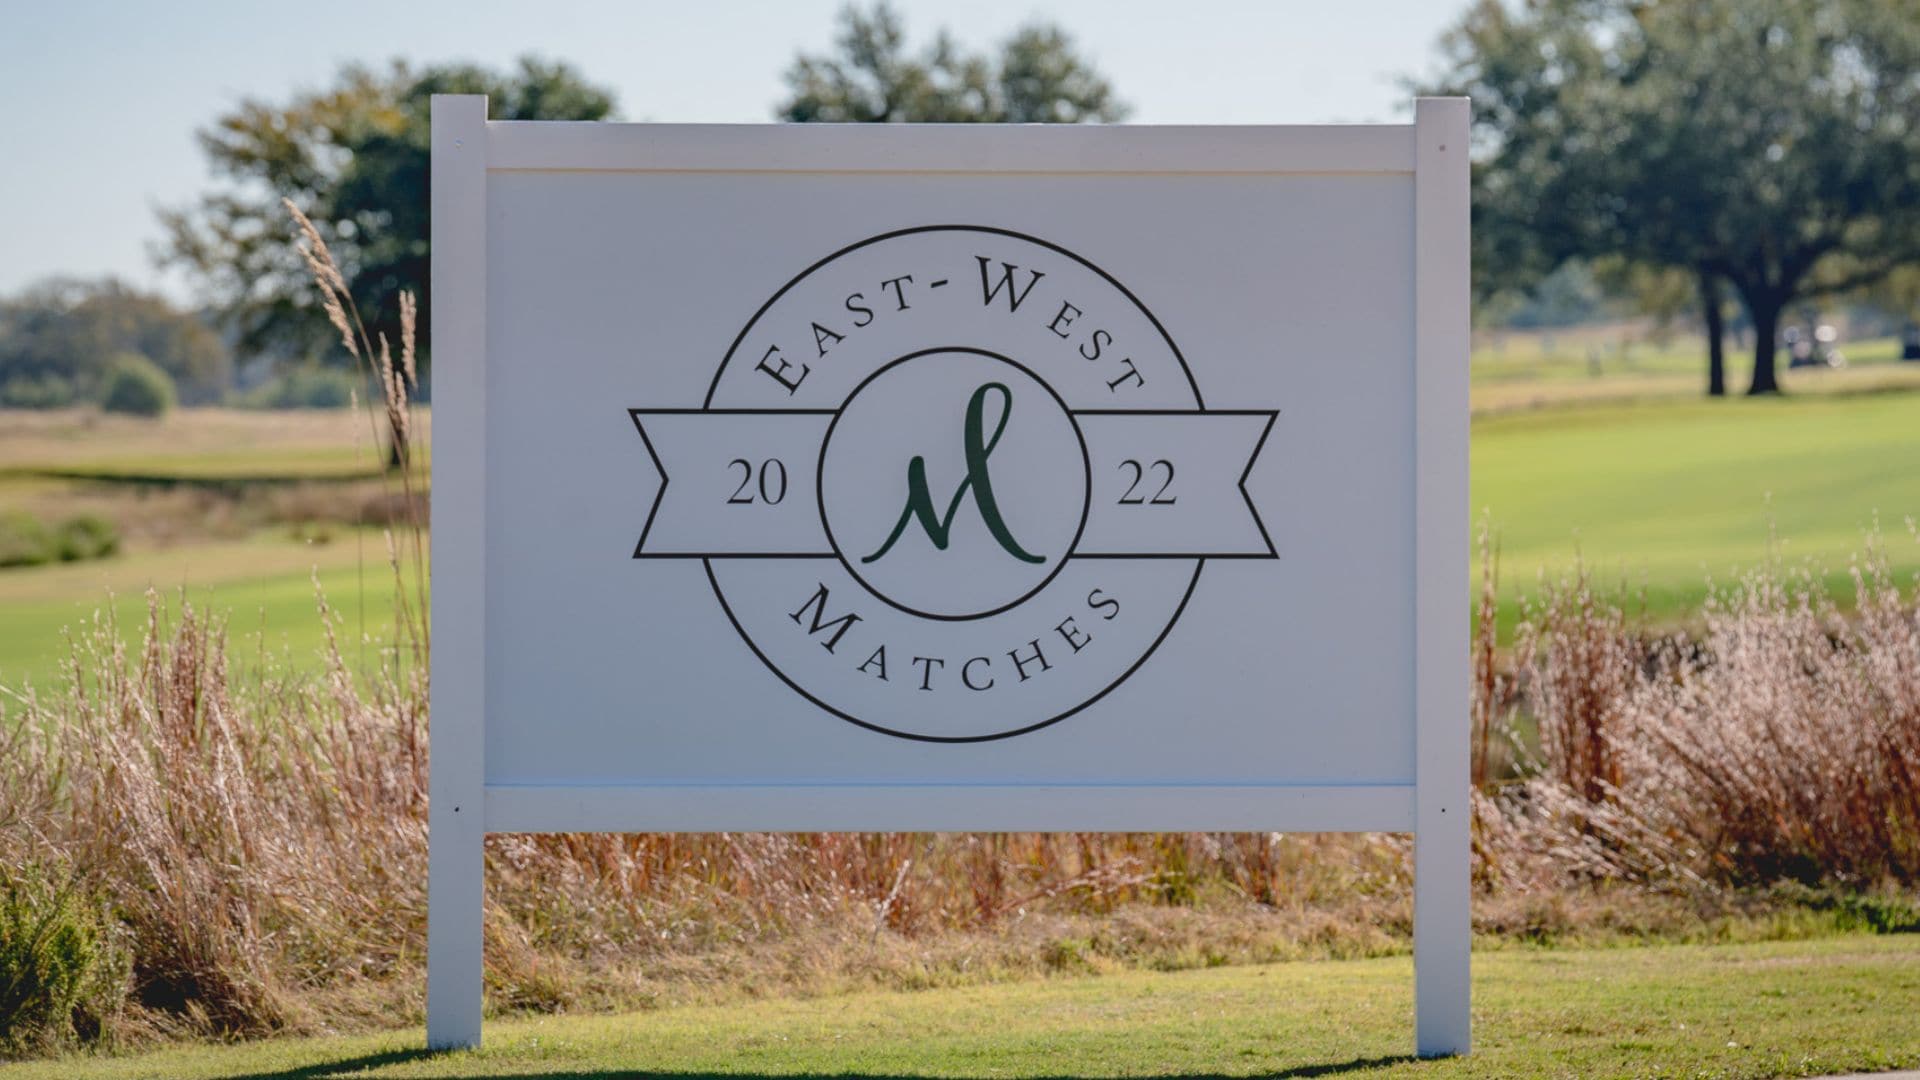 The East wins East West Matches title for first time at Maridoe Golf Club